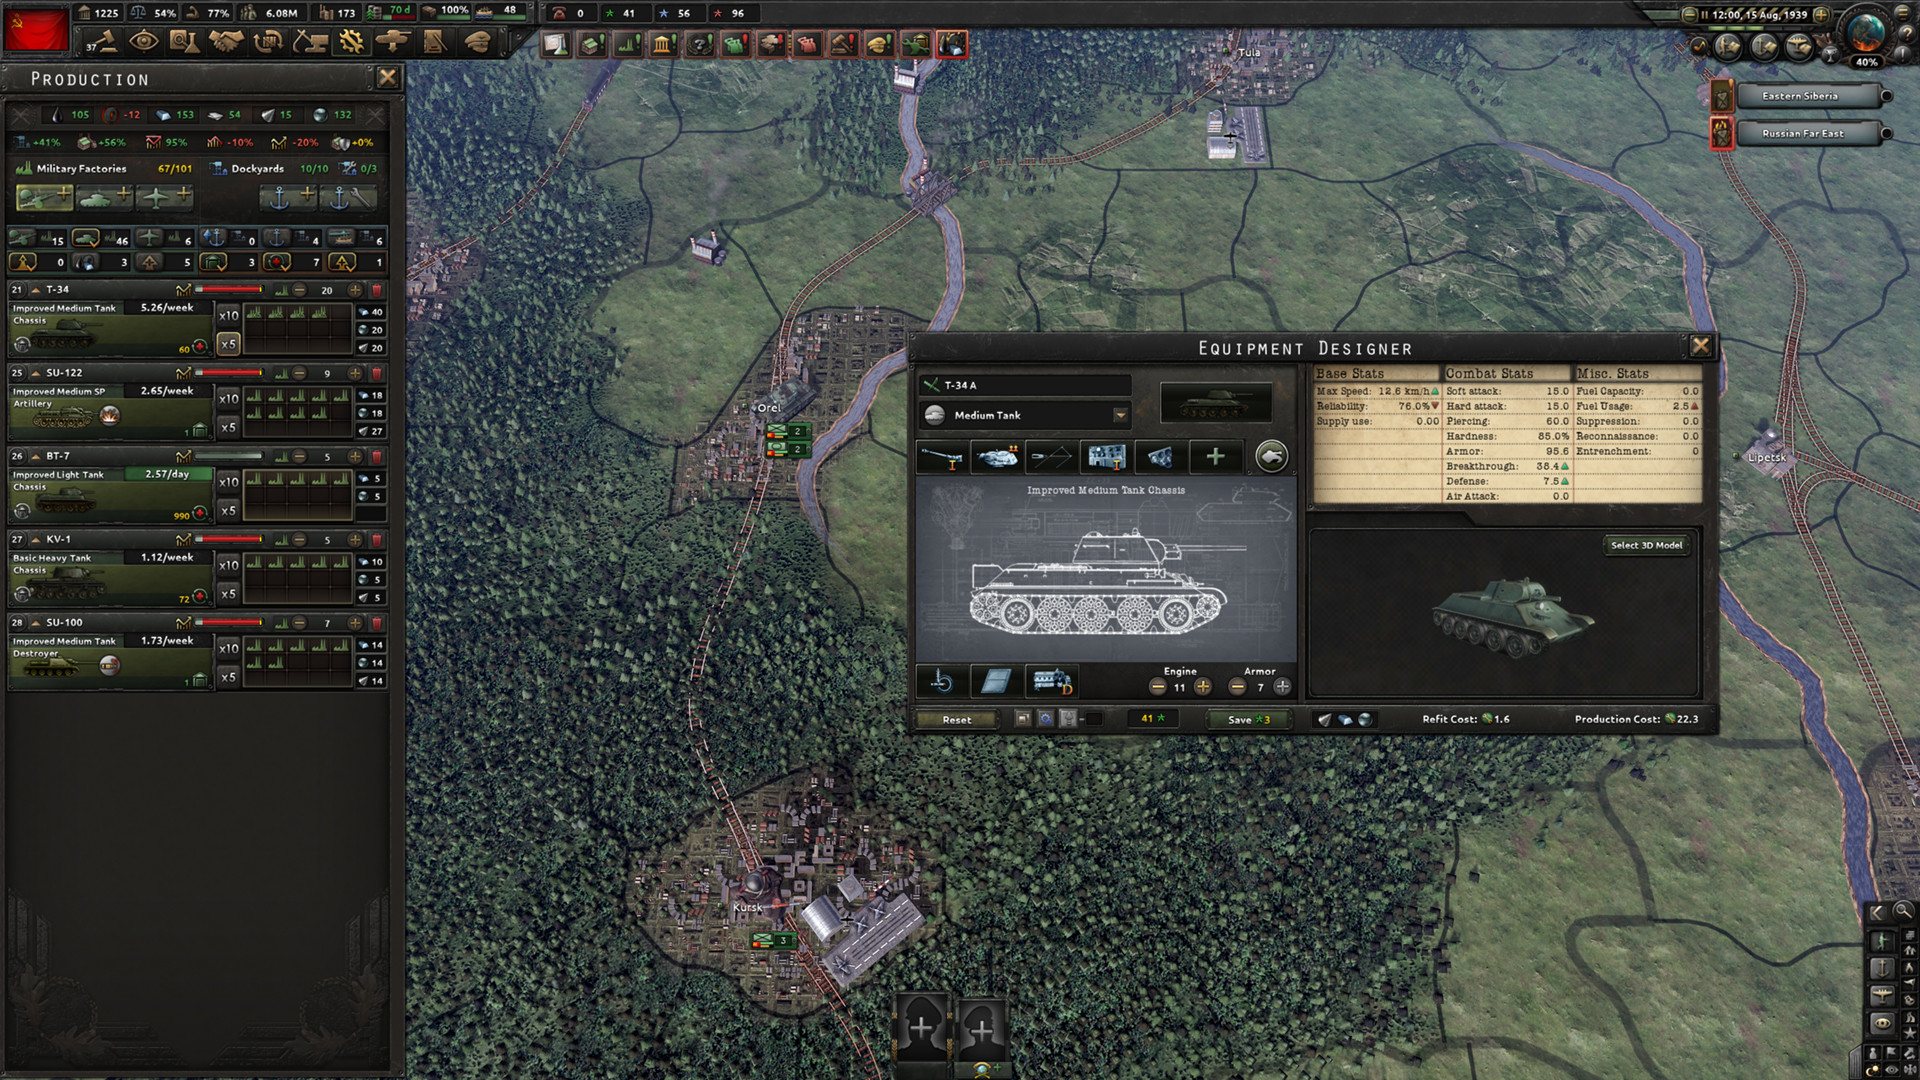 Expansion - Hearts of Iron IV: No Step Back Featured Screenshot #1